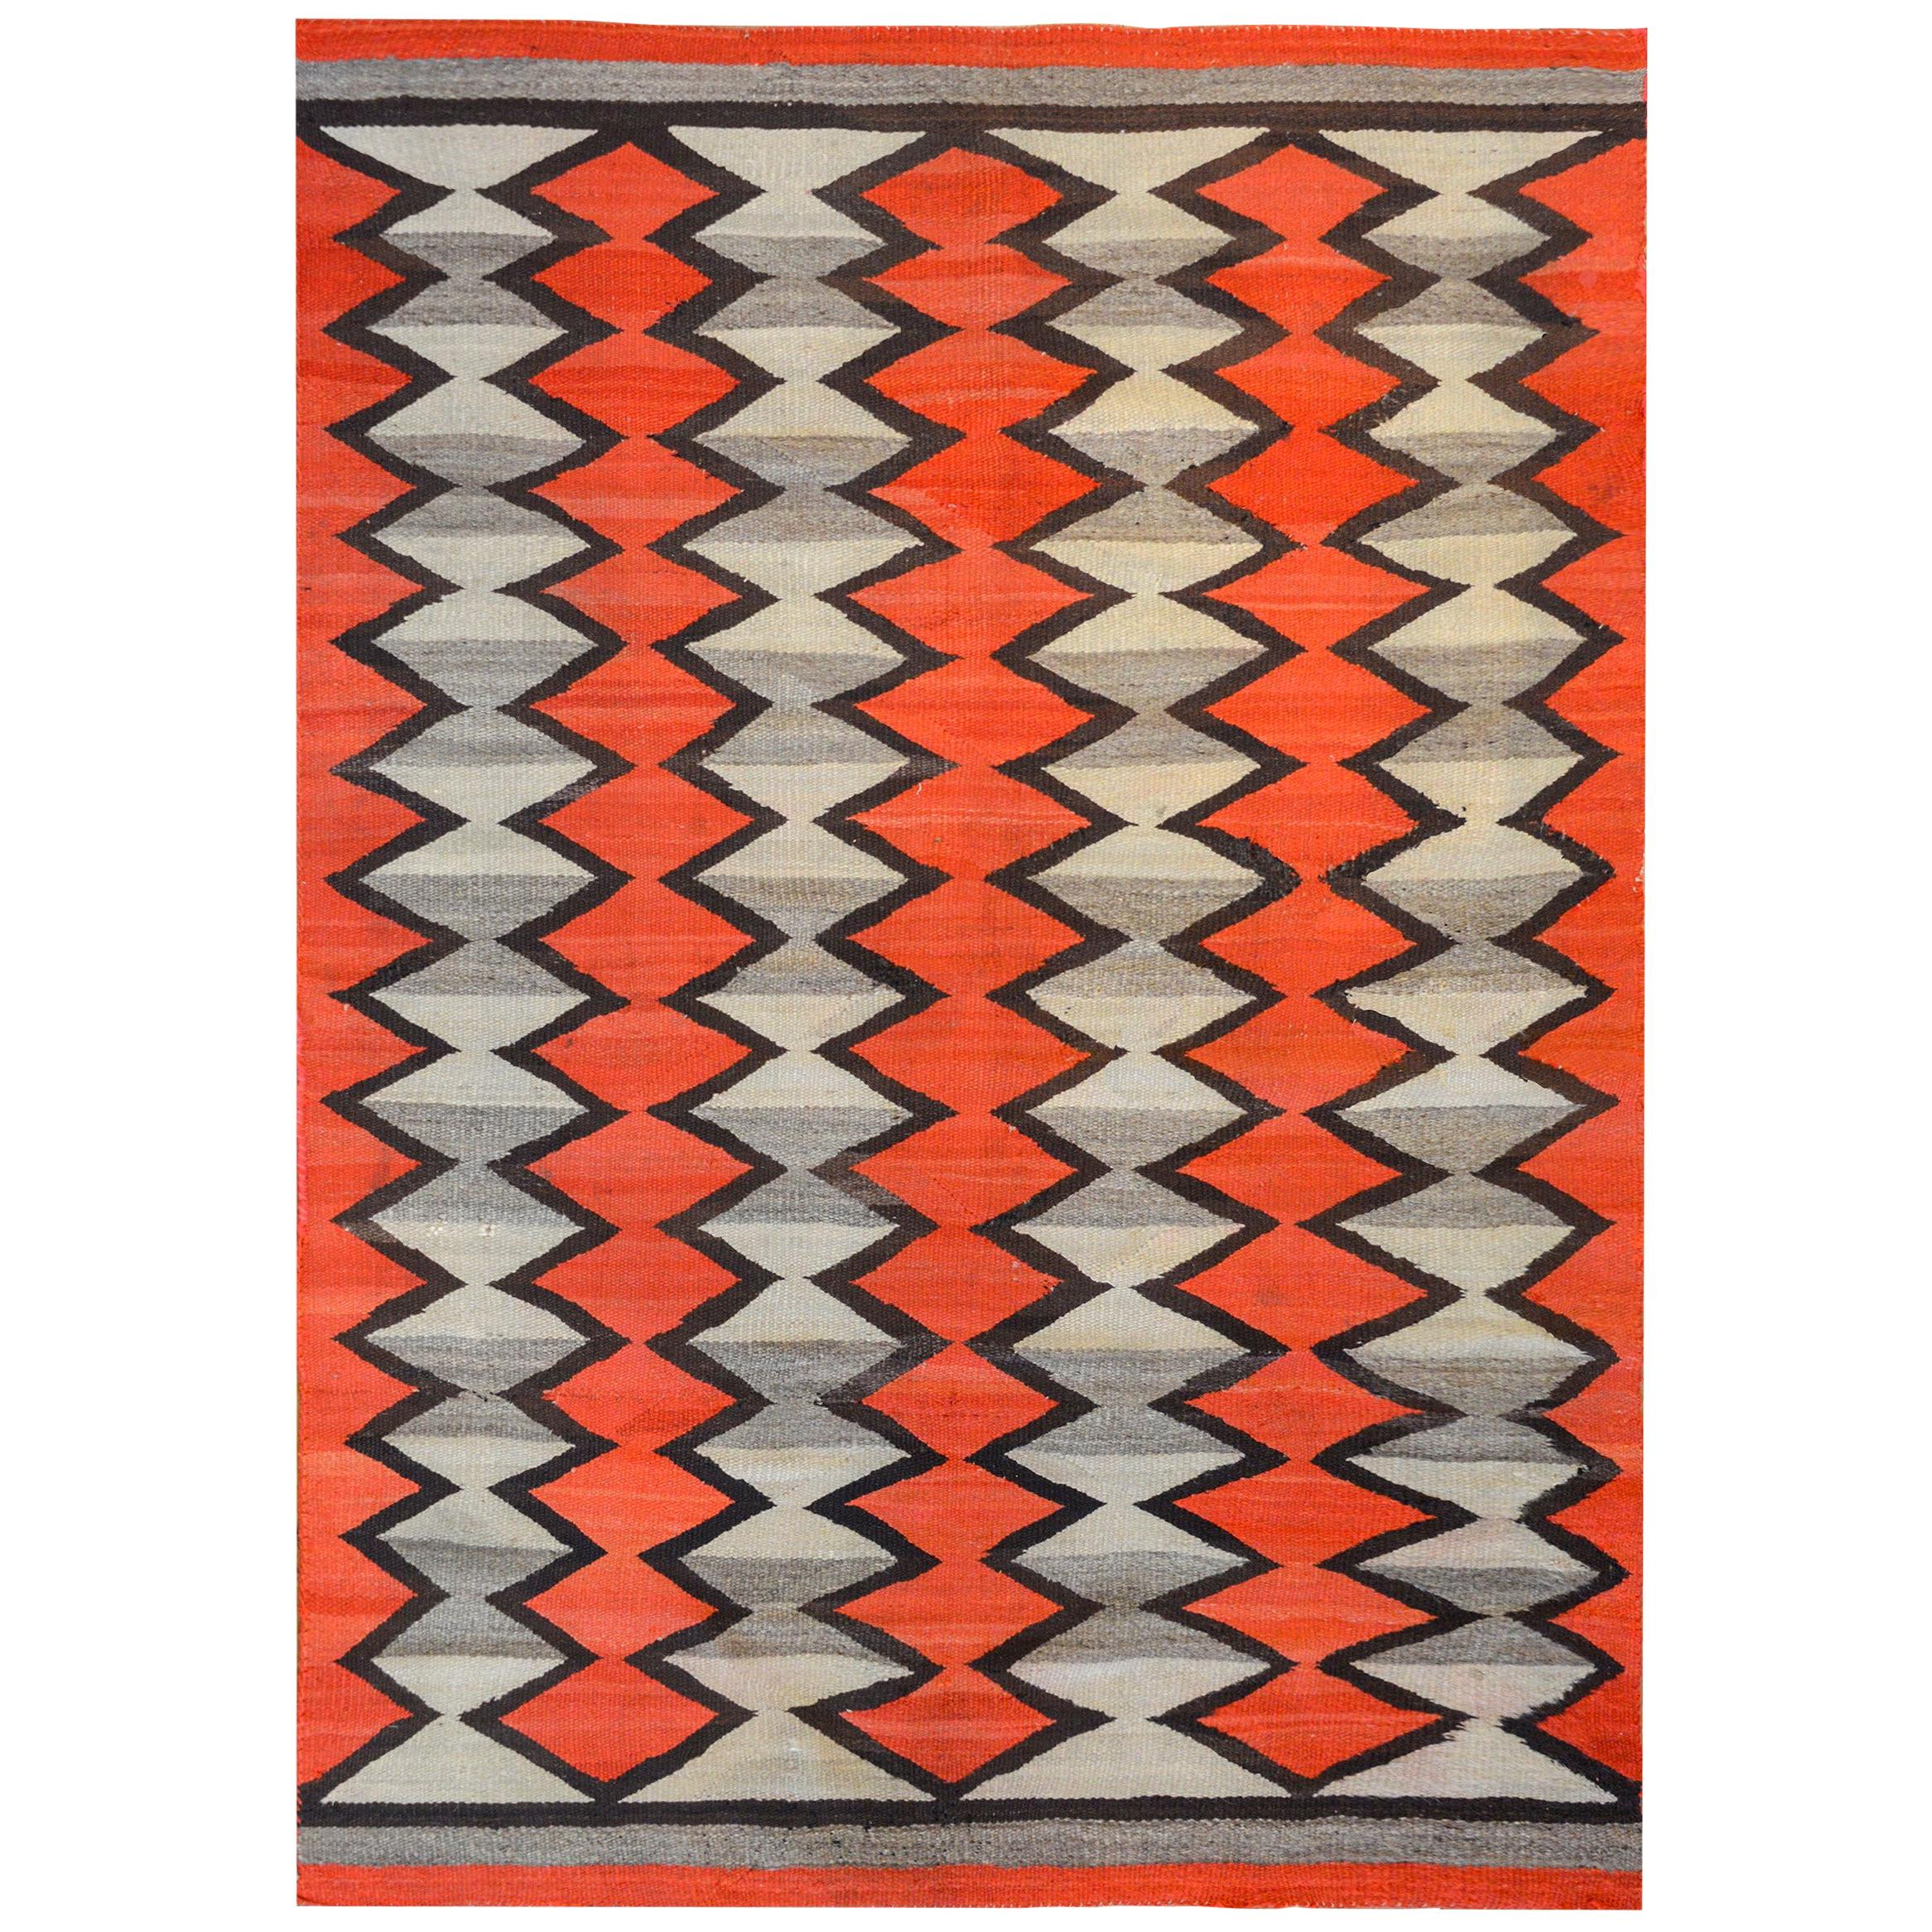 Exceptional Early 20th Century Navajo Rug